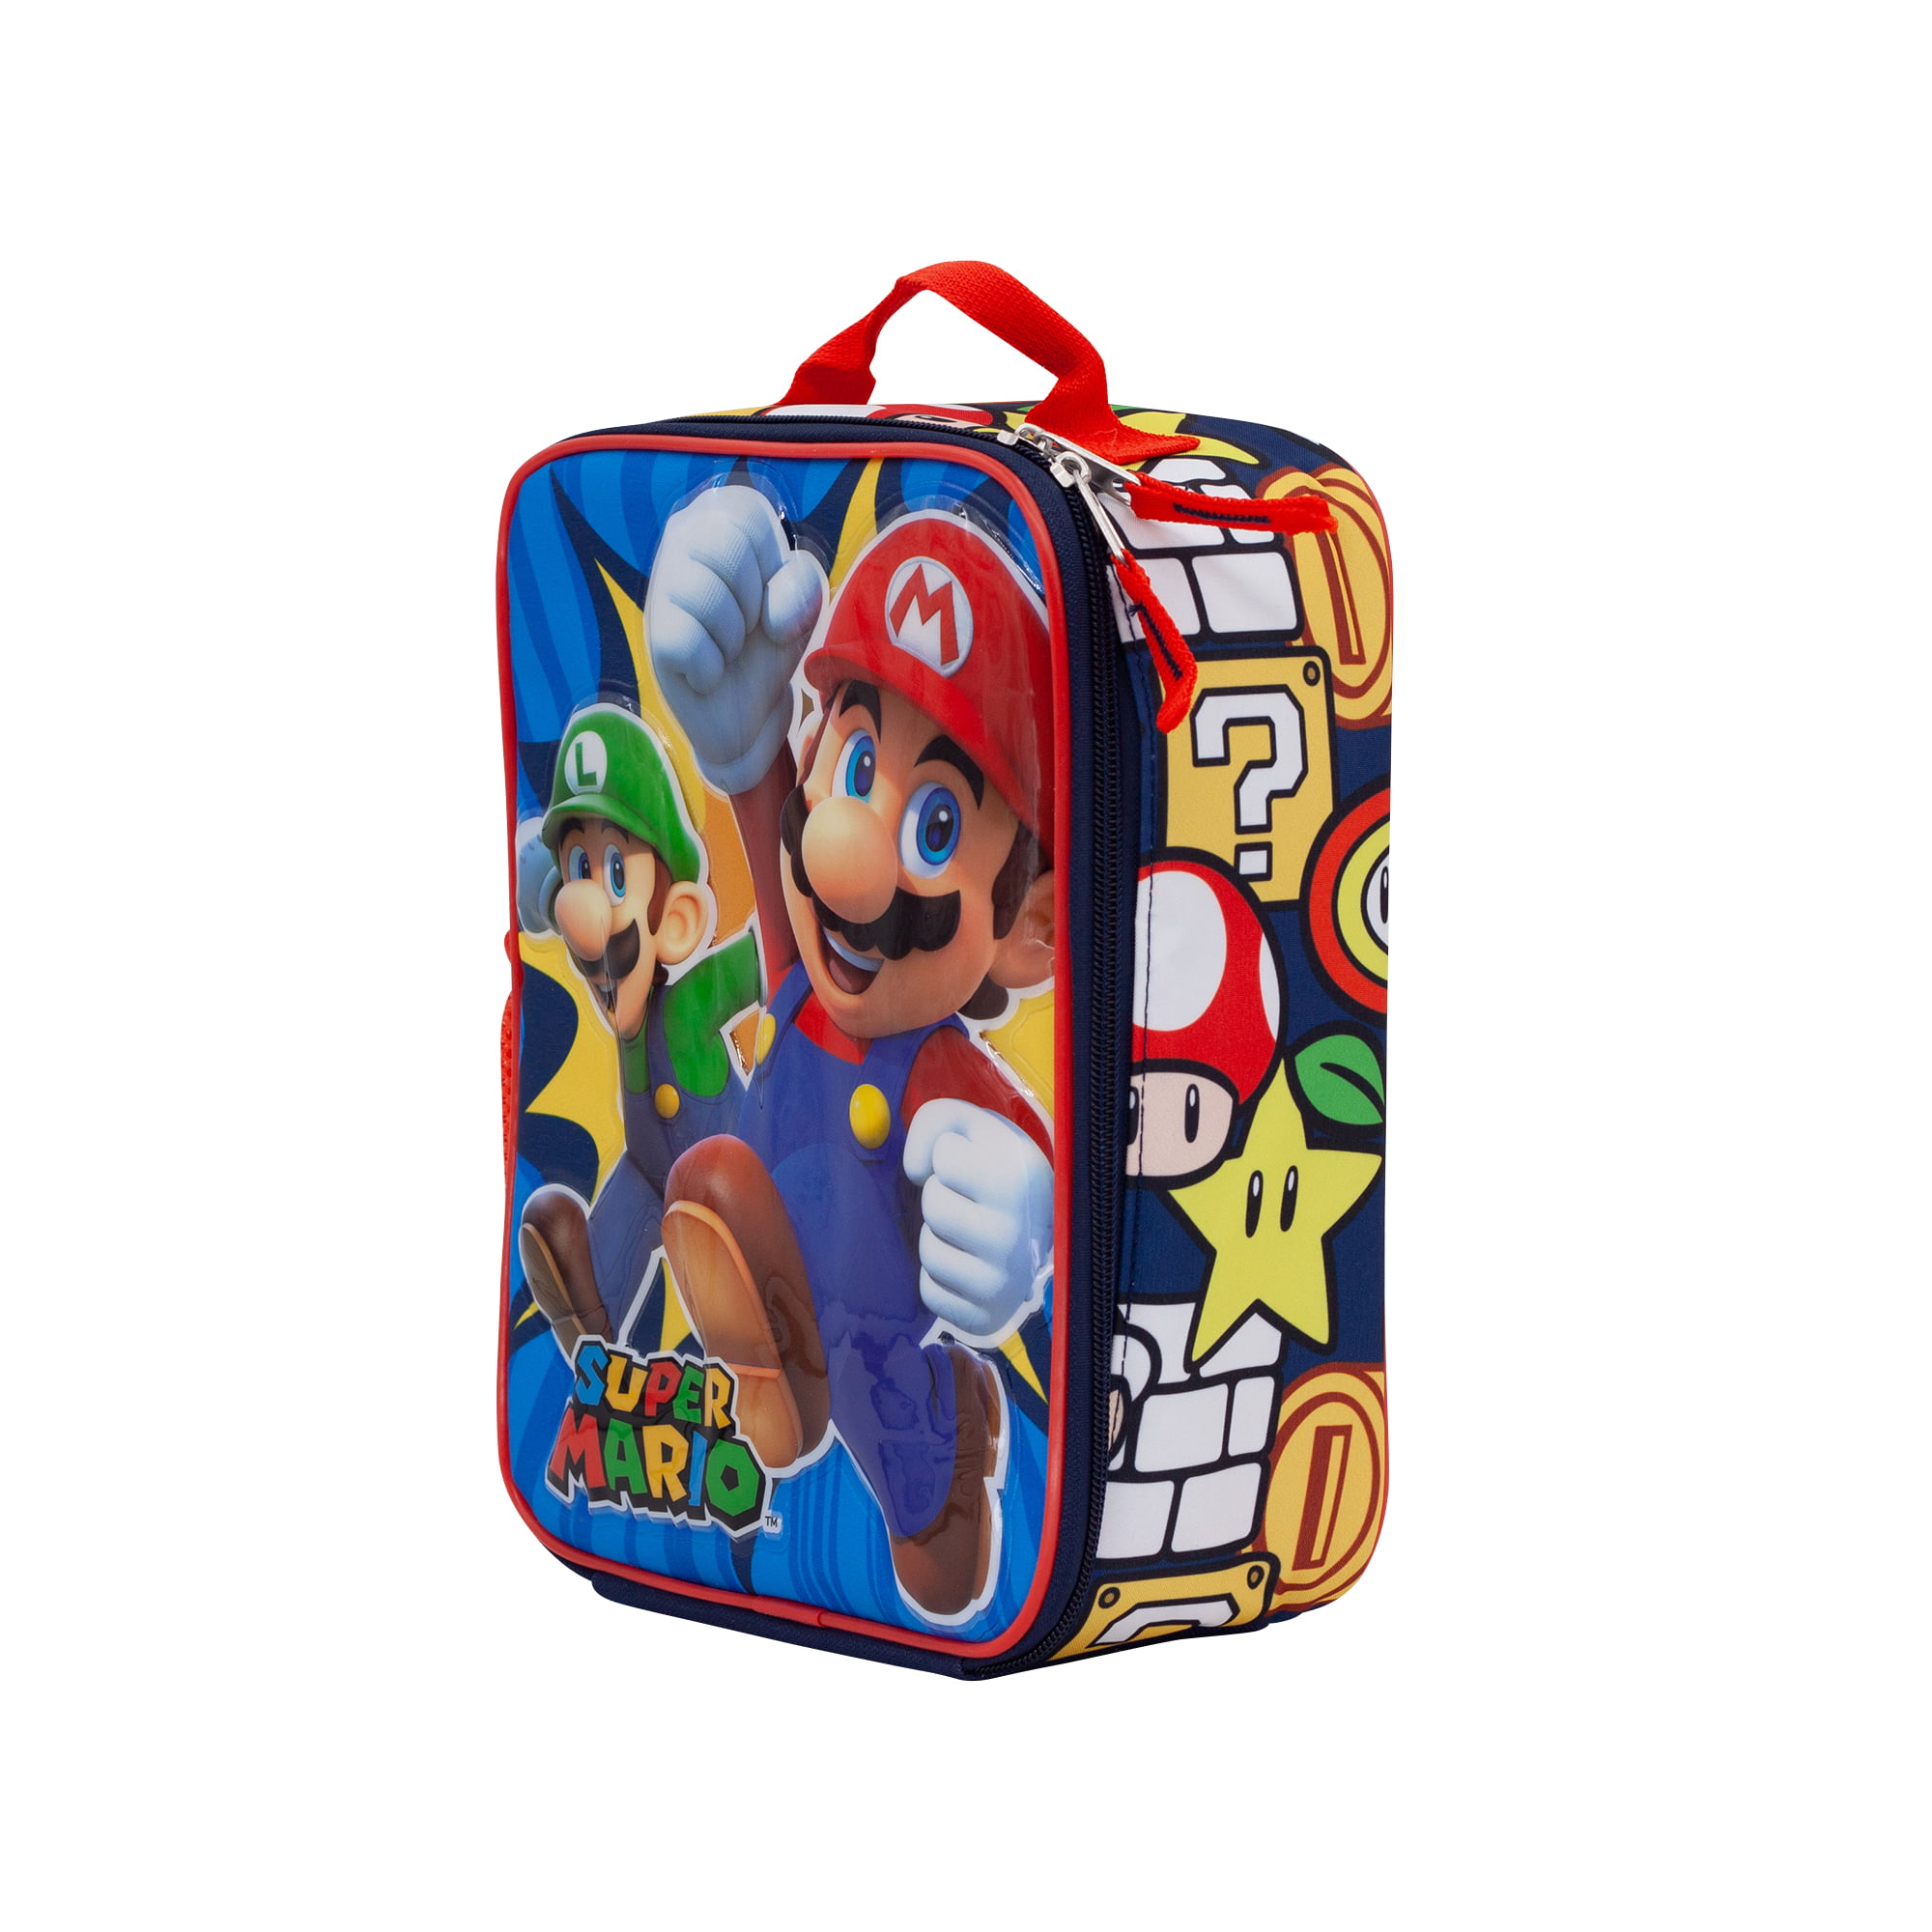 Super Mario Nintendo lunch kit lunch box BPA Free insulated NEW